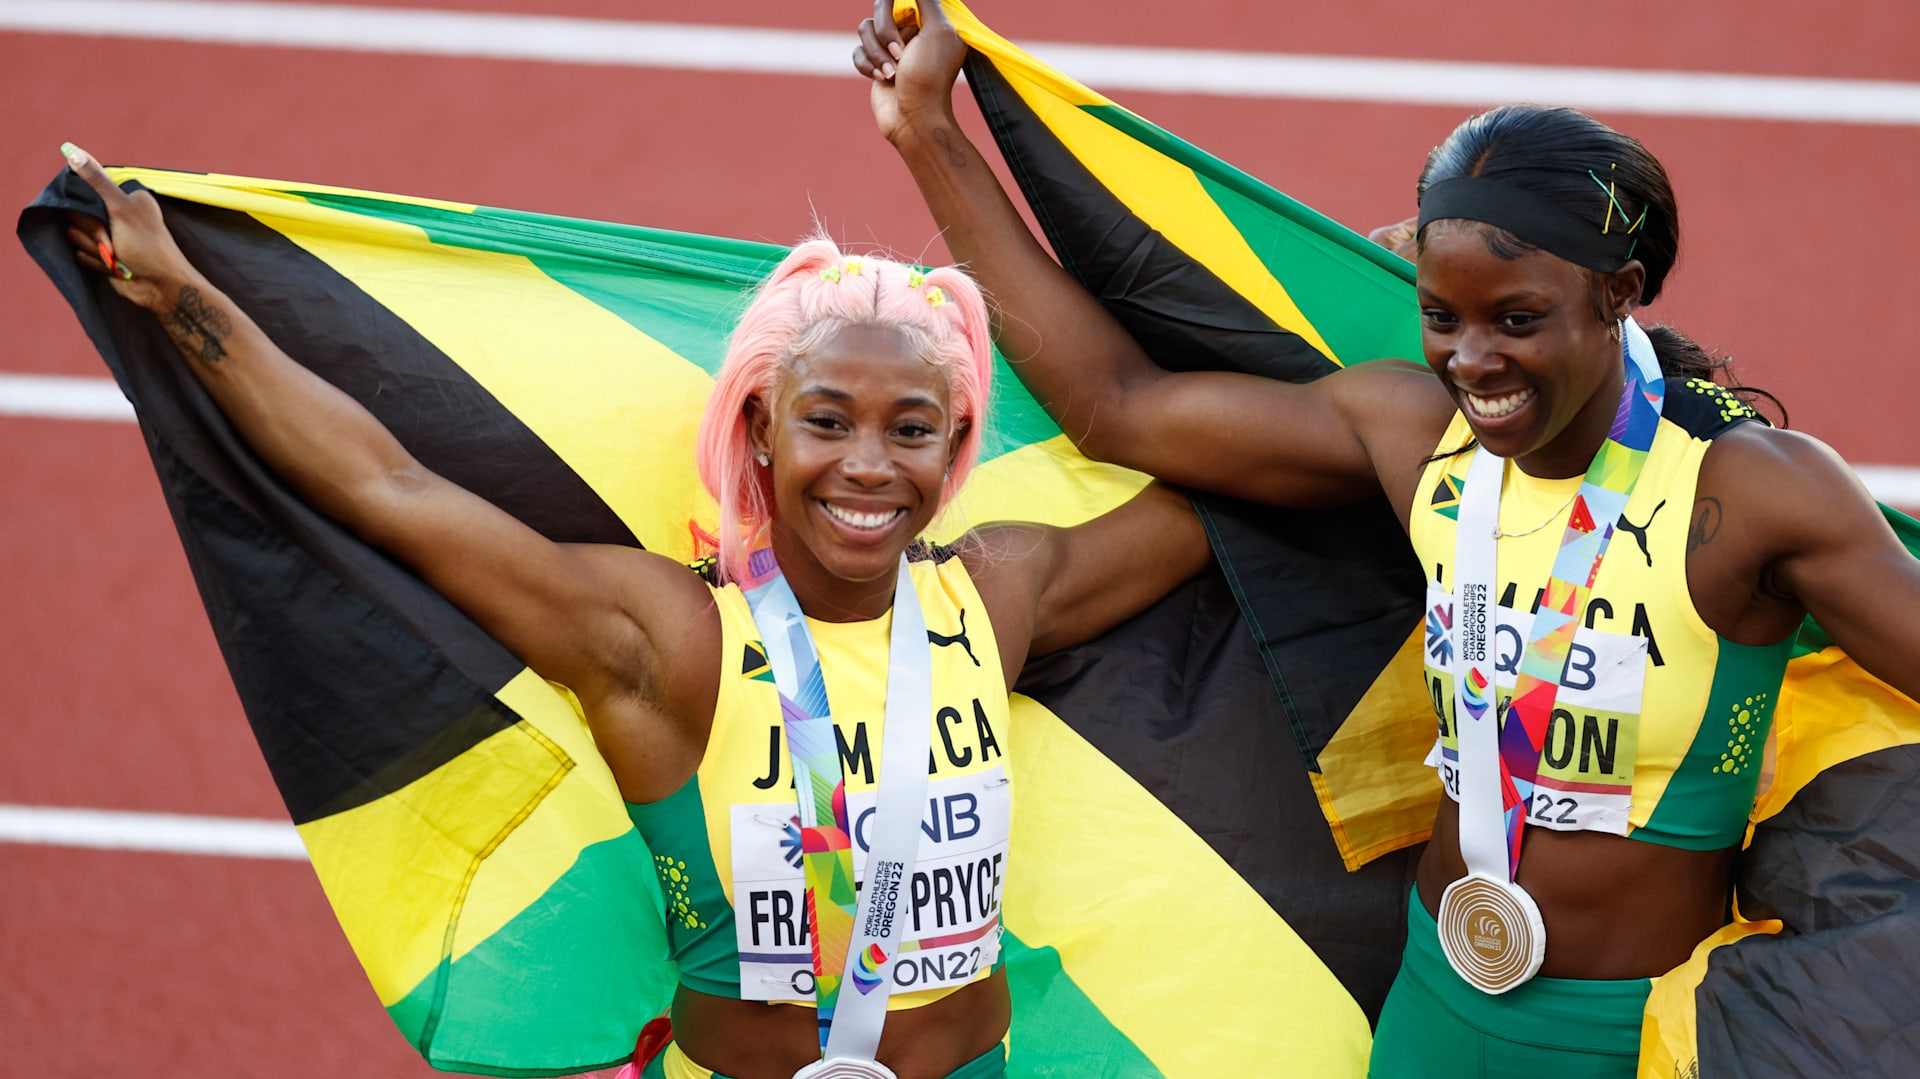 Top 10 Jamaican track and field athletic stars